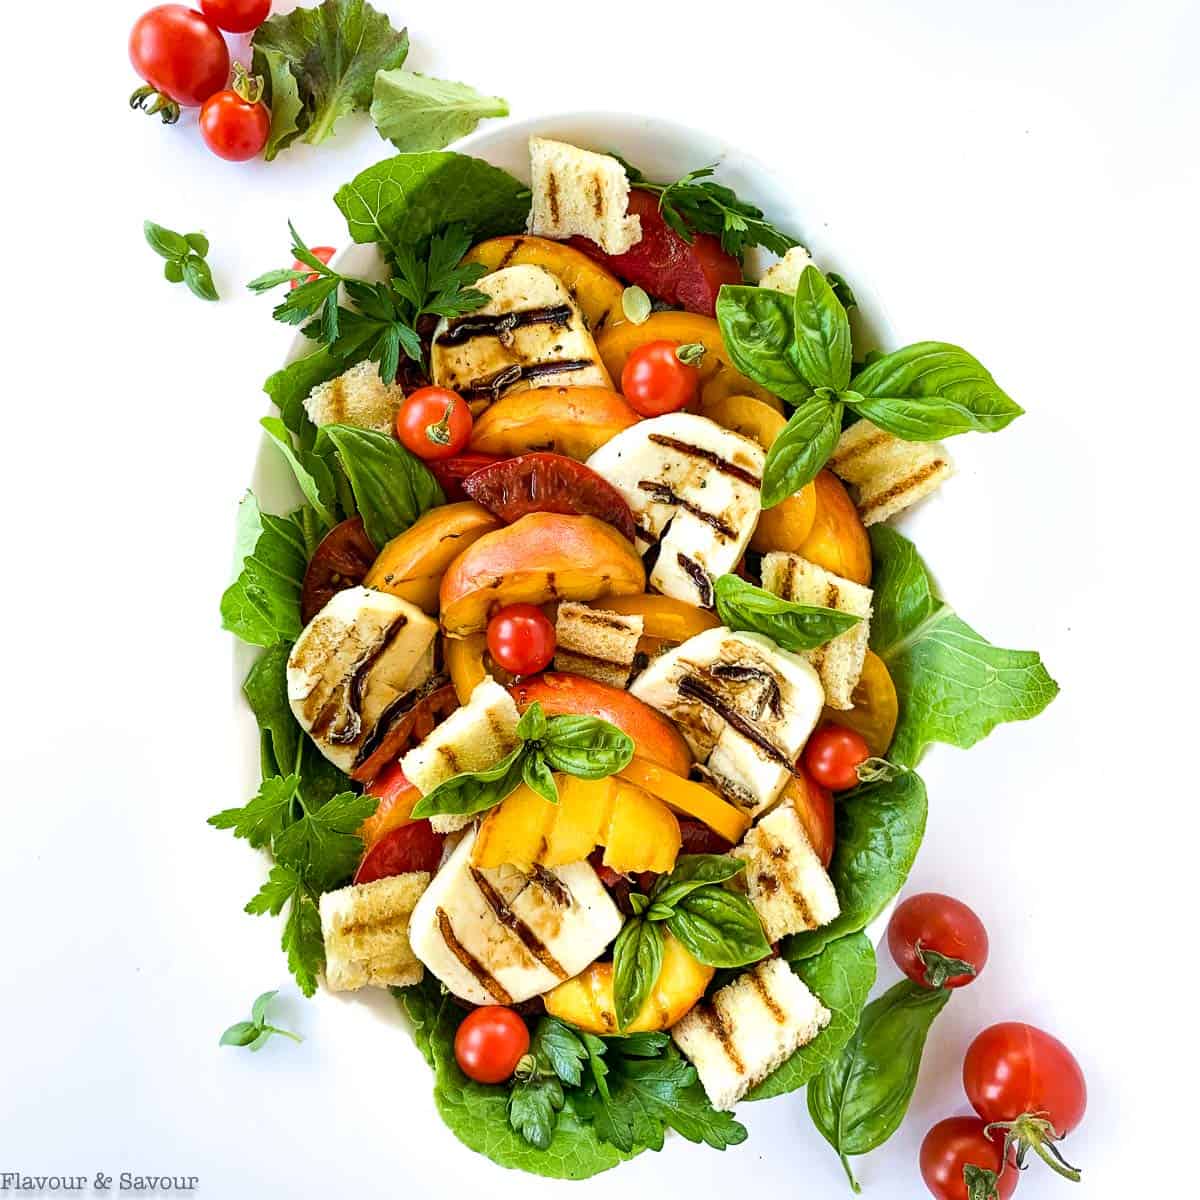 Grilled Halloumi Peach and Tomato Salad overhead view